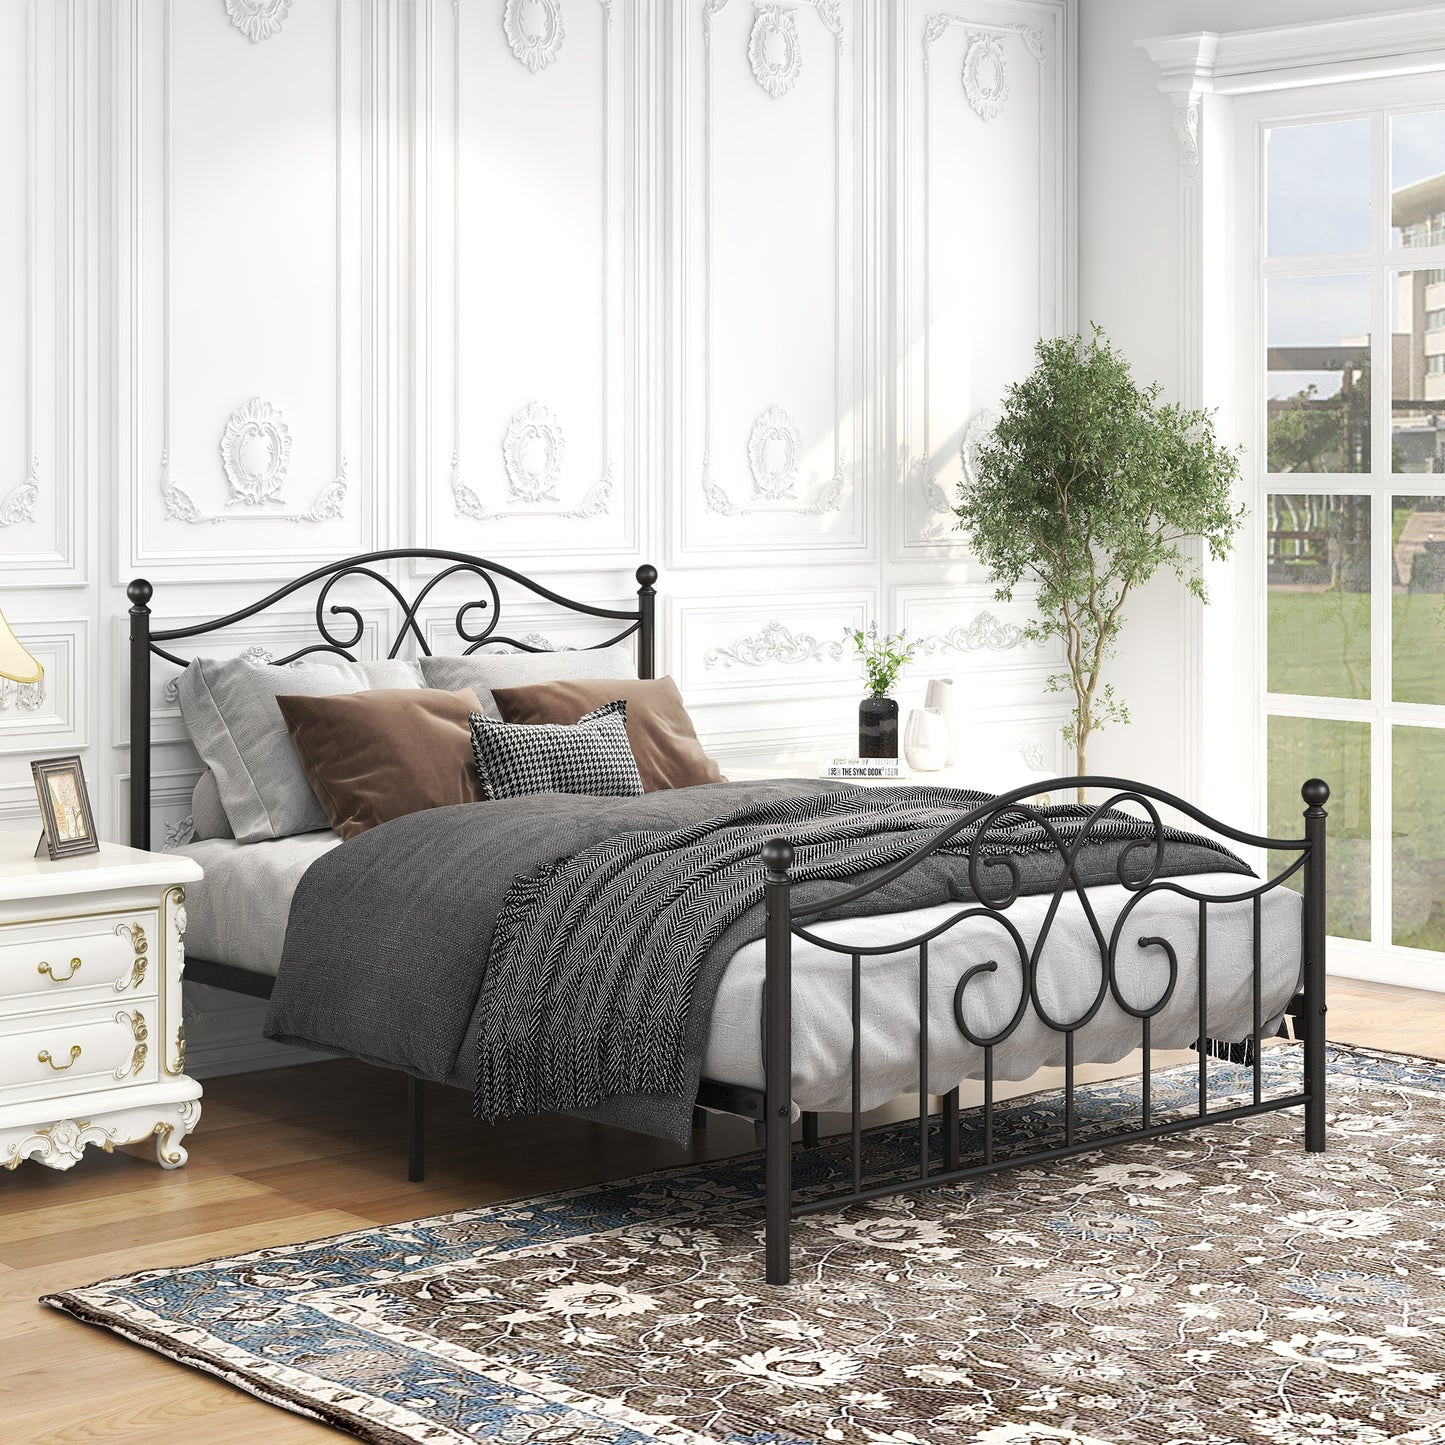 BTMWAY Queen Size Bed Frame, Queen Metal Platform Bed with Headboard and Footboard, LJC